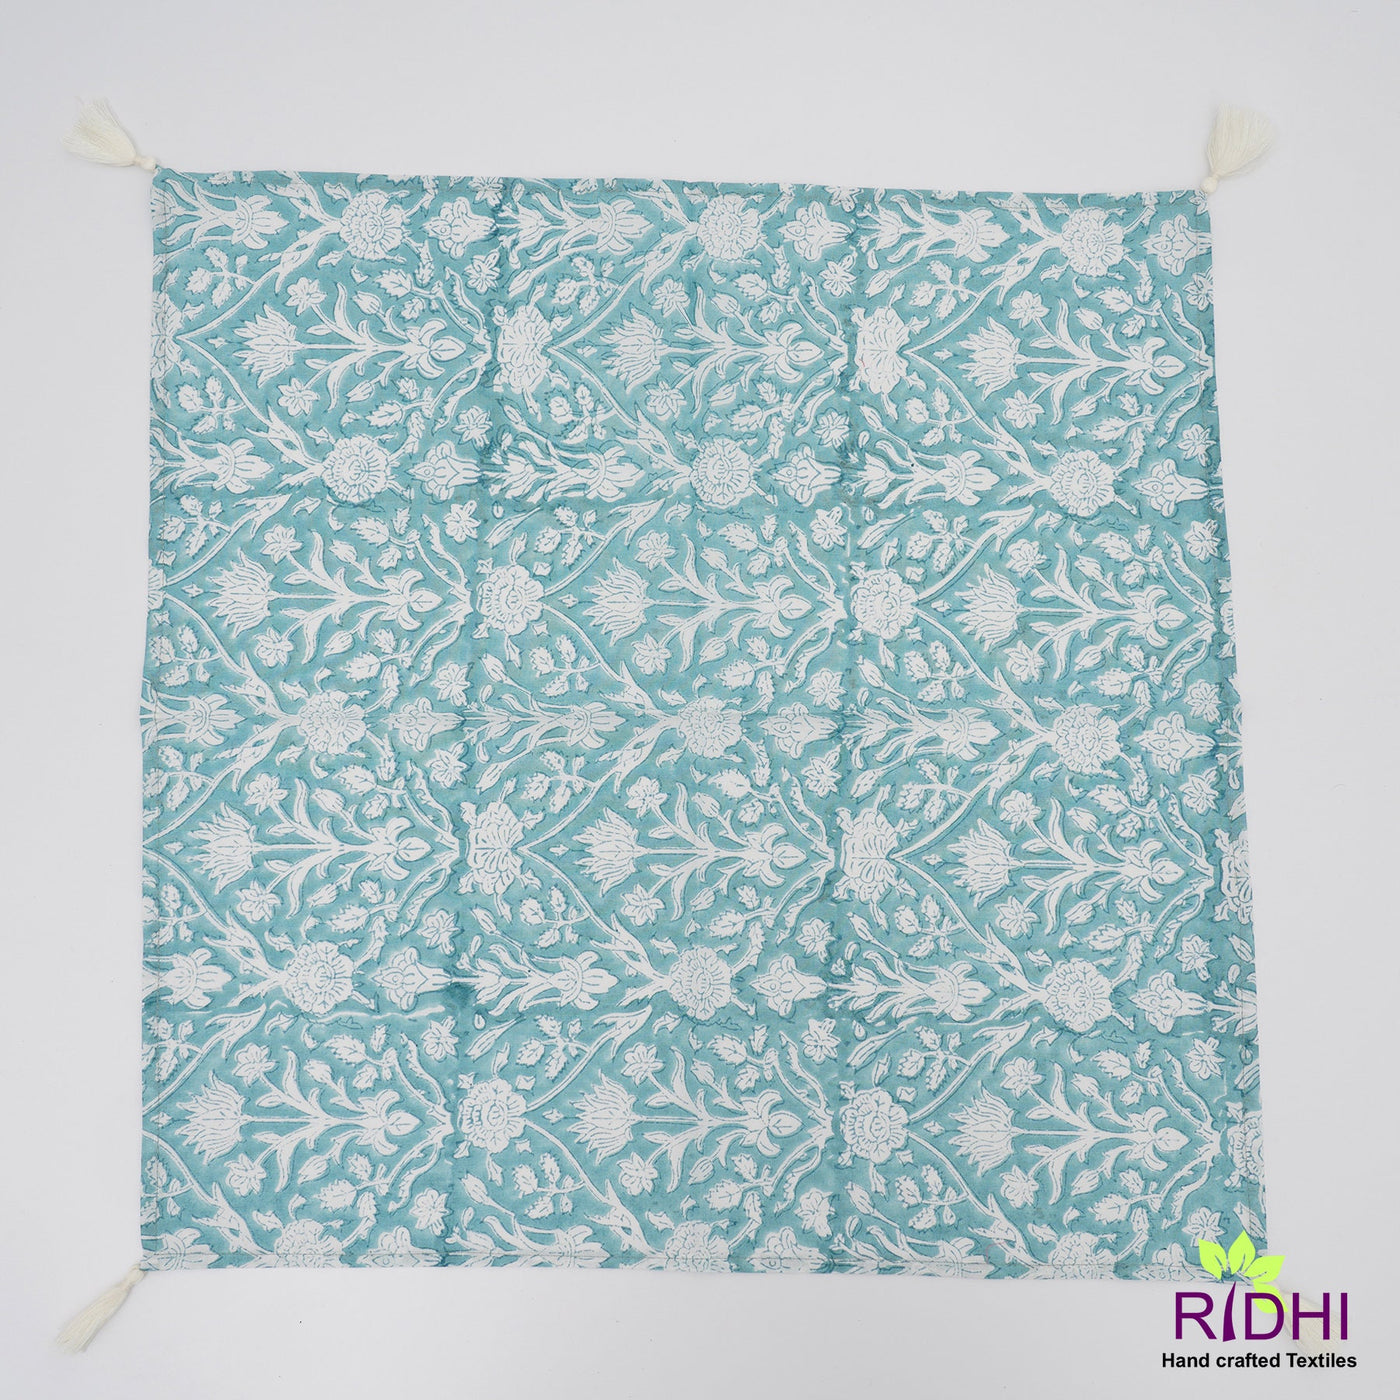 Teal Blue and Off White Indian Hand Block Floral Printed Cotton Cloth Soft Napkins, Wedding Event Party Home, 9X9"- Cocktail 20X20"- Dinner